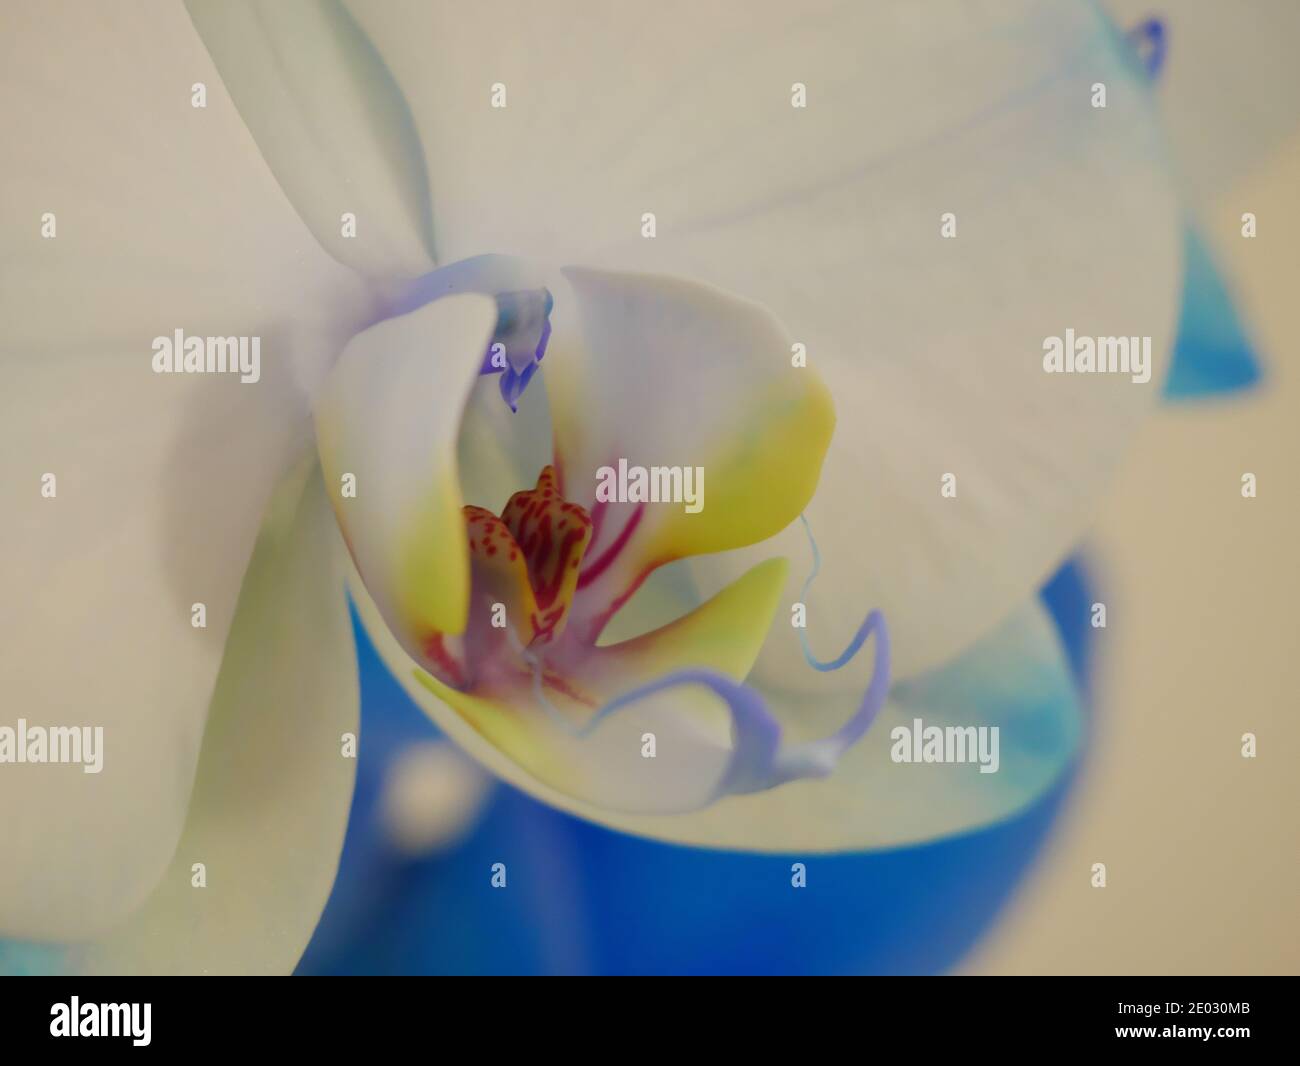 Abstract background on a blue and yellow orchid Stock Photo